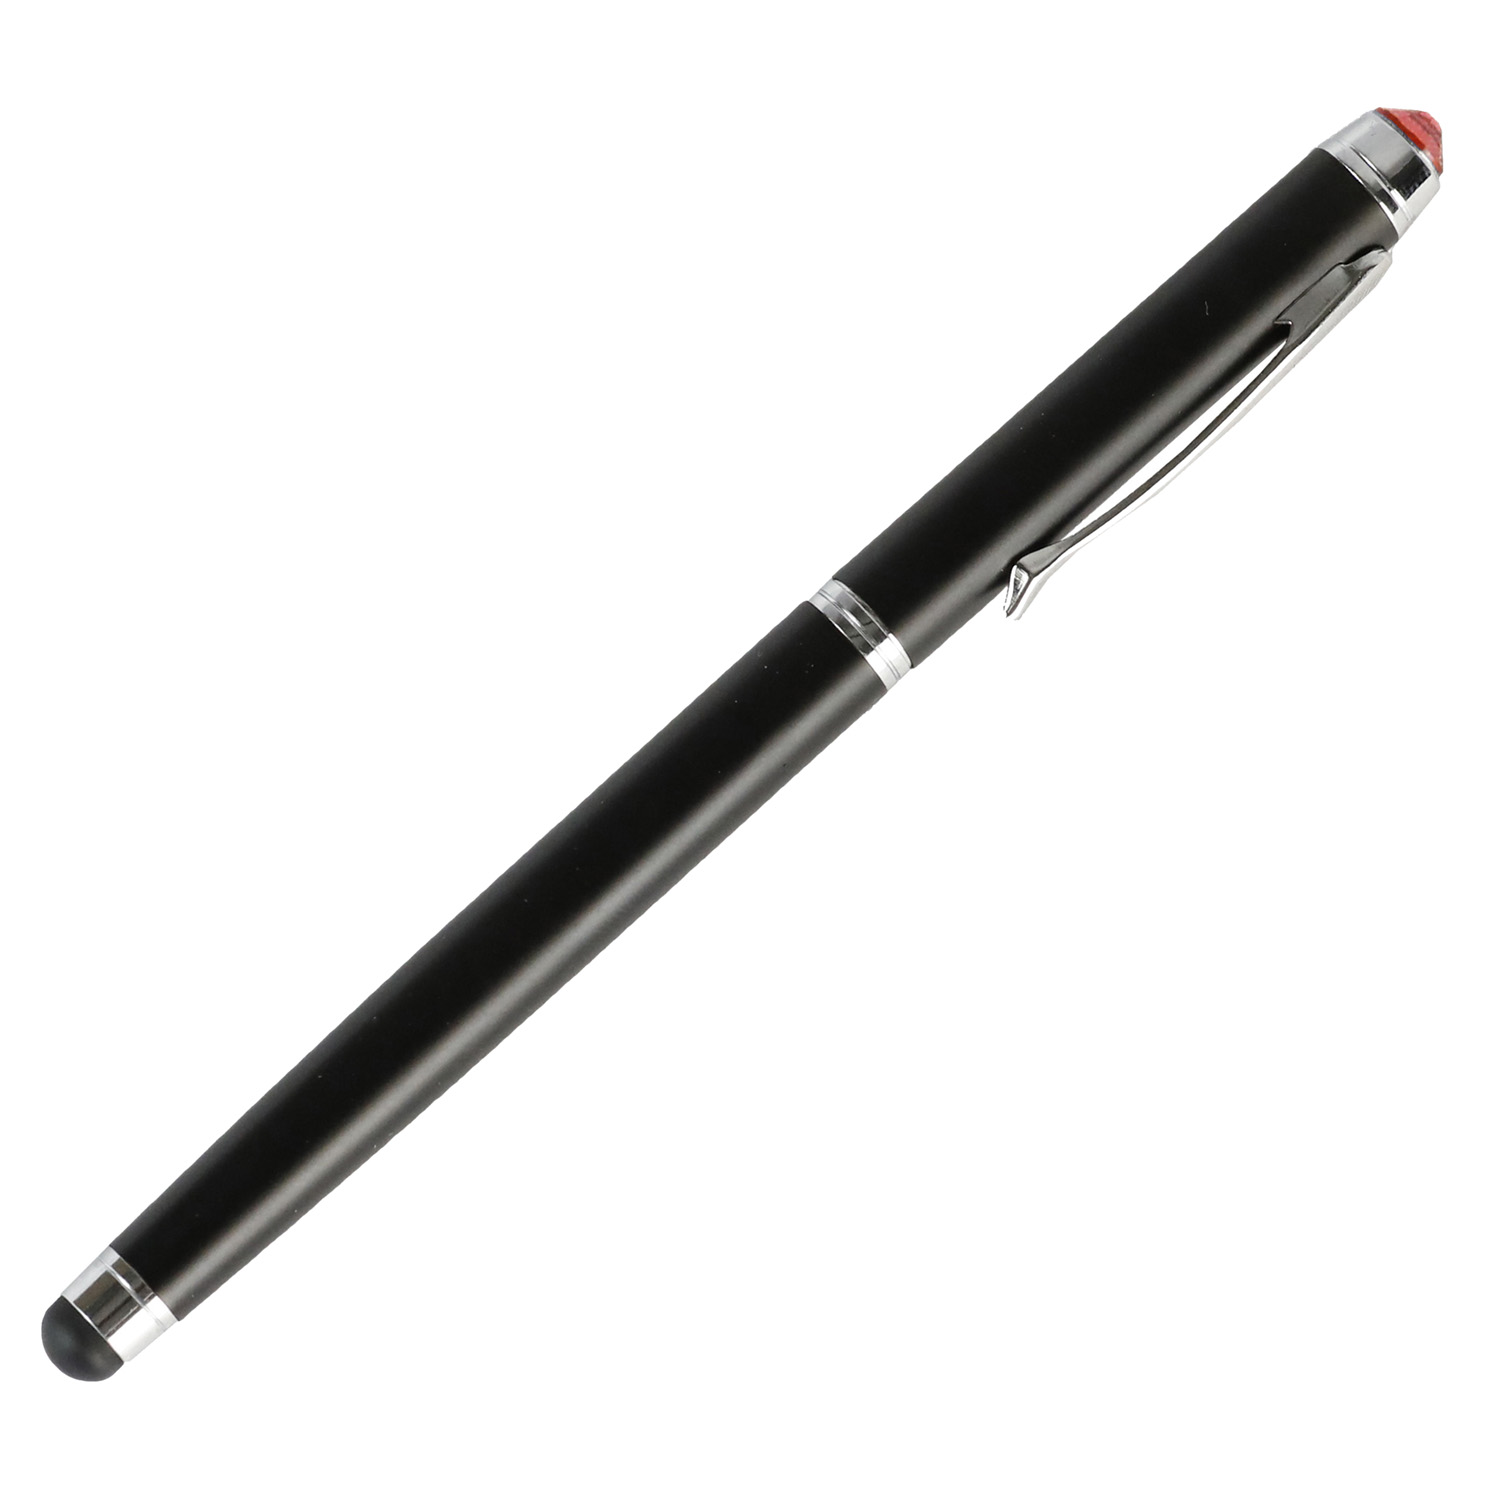 Universal Stylus Pen - Touch Screen with Gem for Iphone Ipad Tablet Smartphones - Garnet